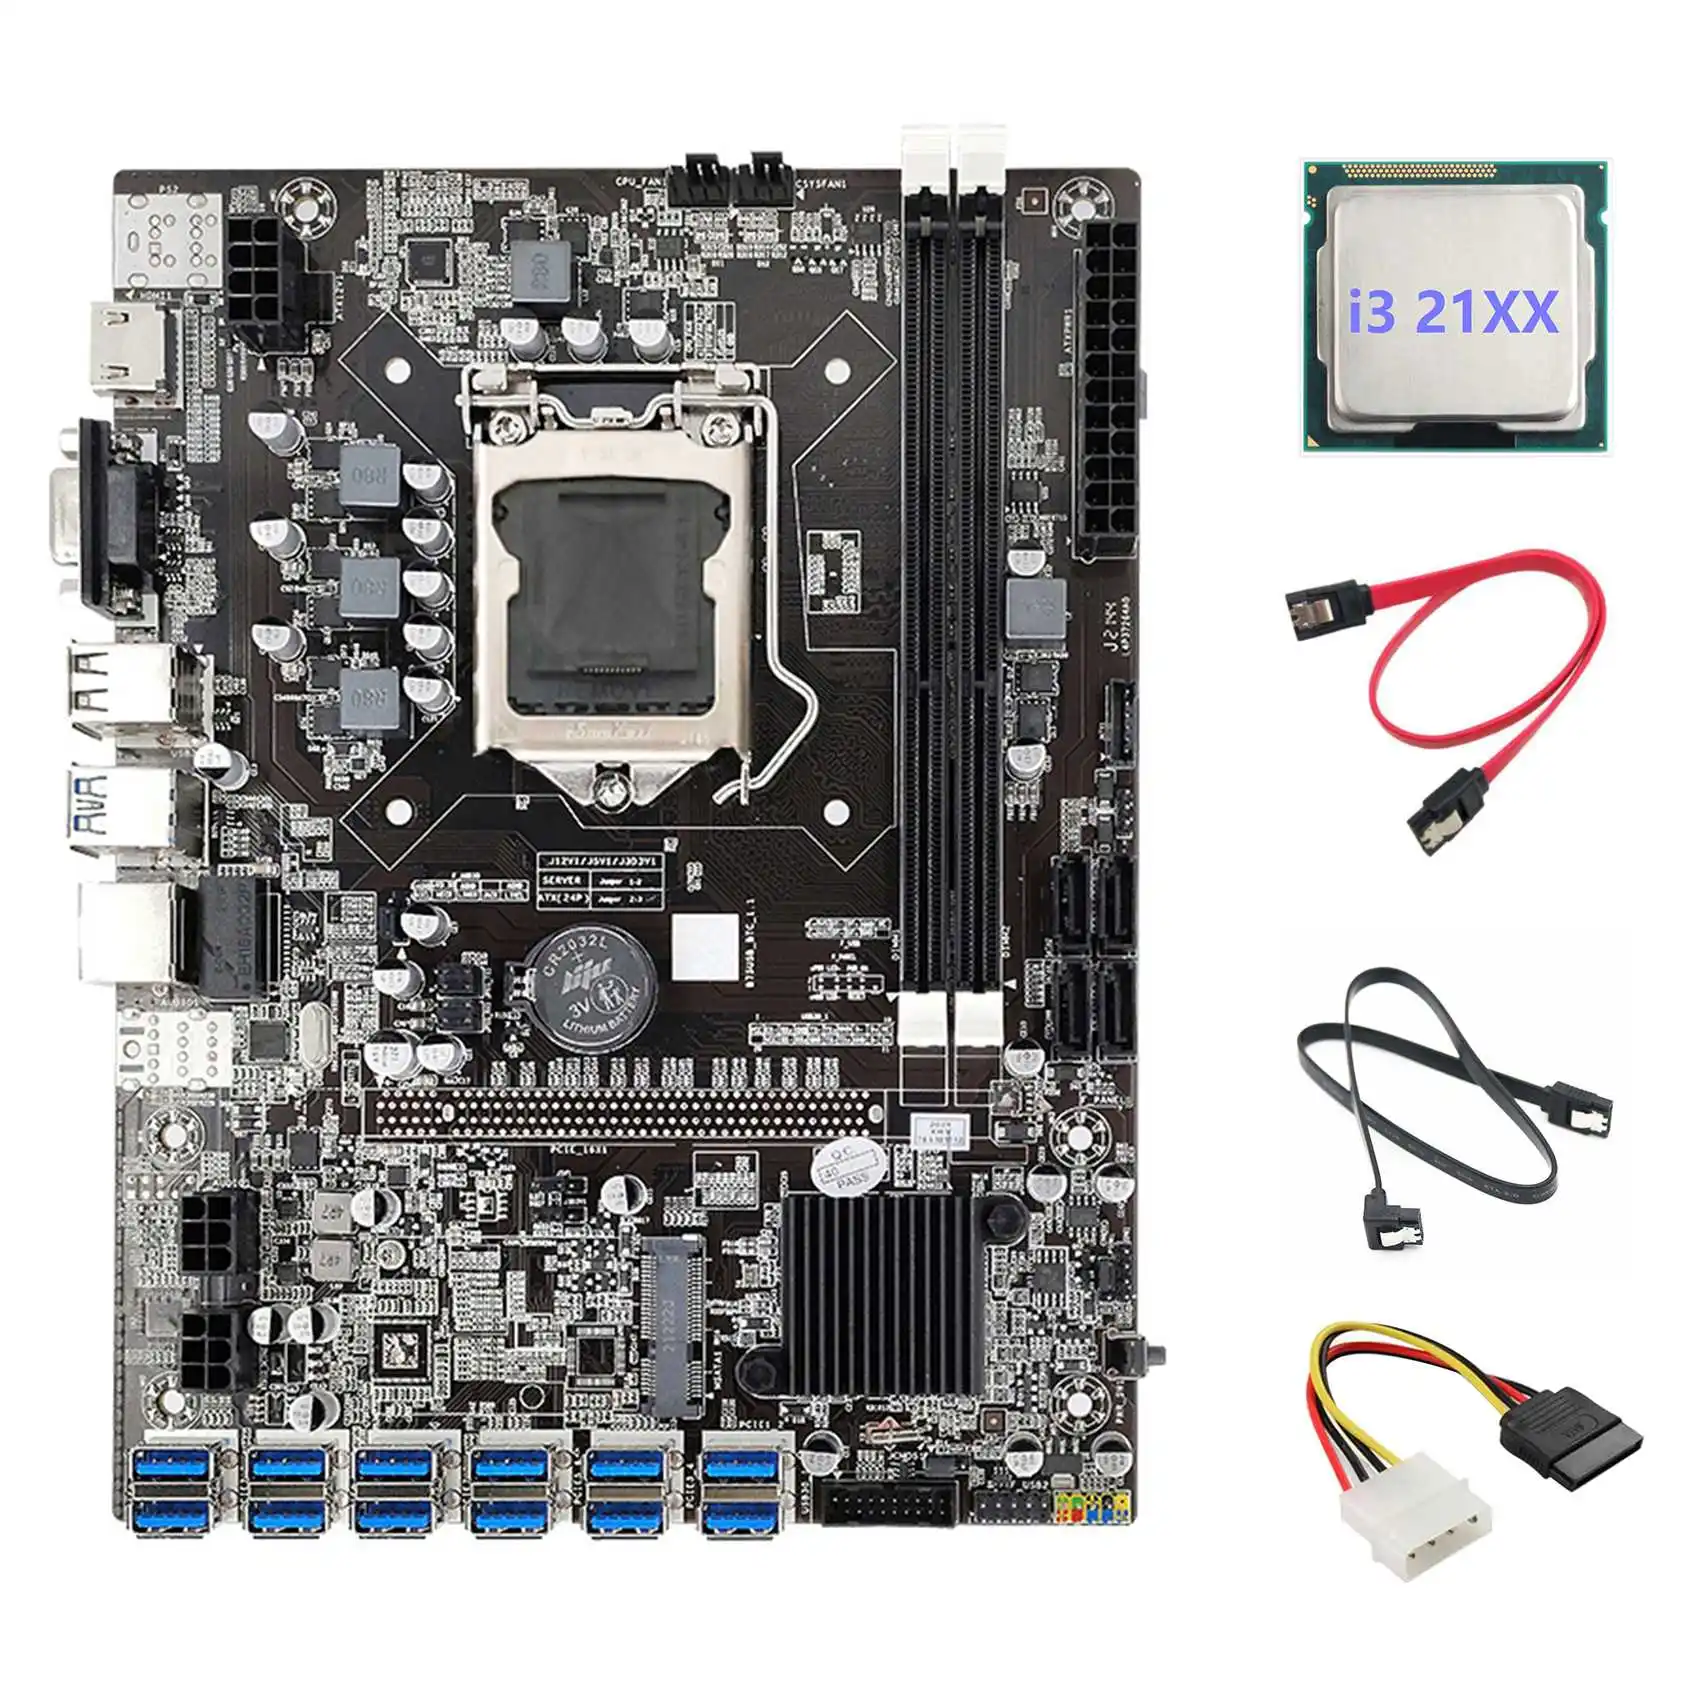 

B75 12USB BTC Mining Motherboard+I3 21XX CPU+2XSATA Cable+4PIN IDE to SATA Cable 12 USB3.0 B75 ETH Miner Motherboard